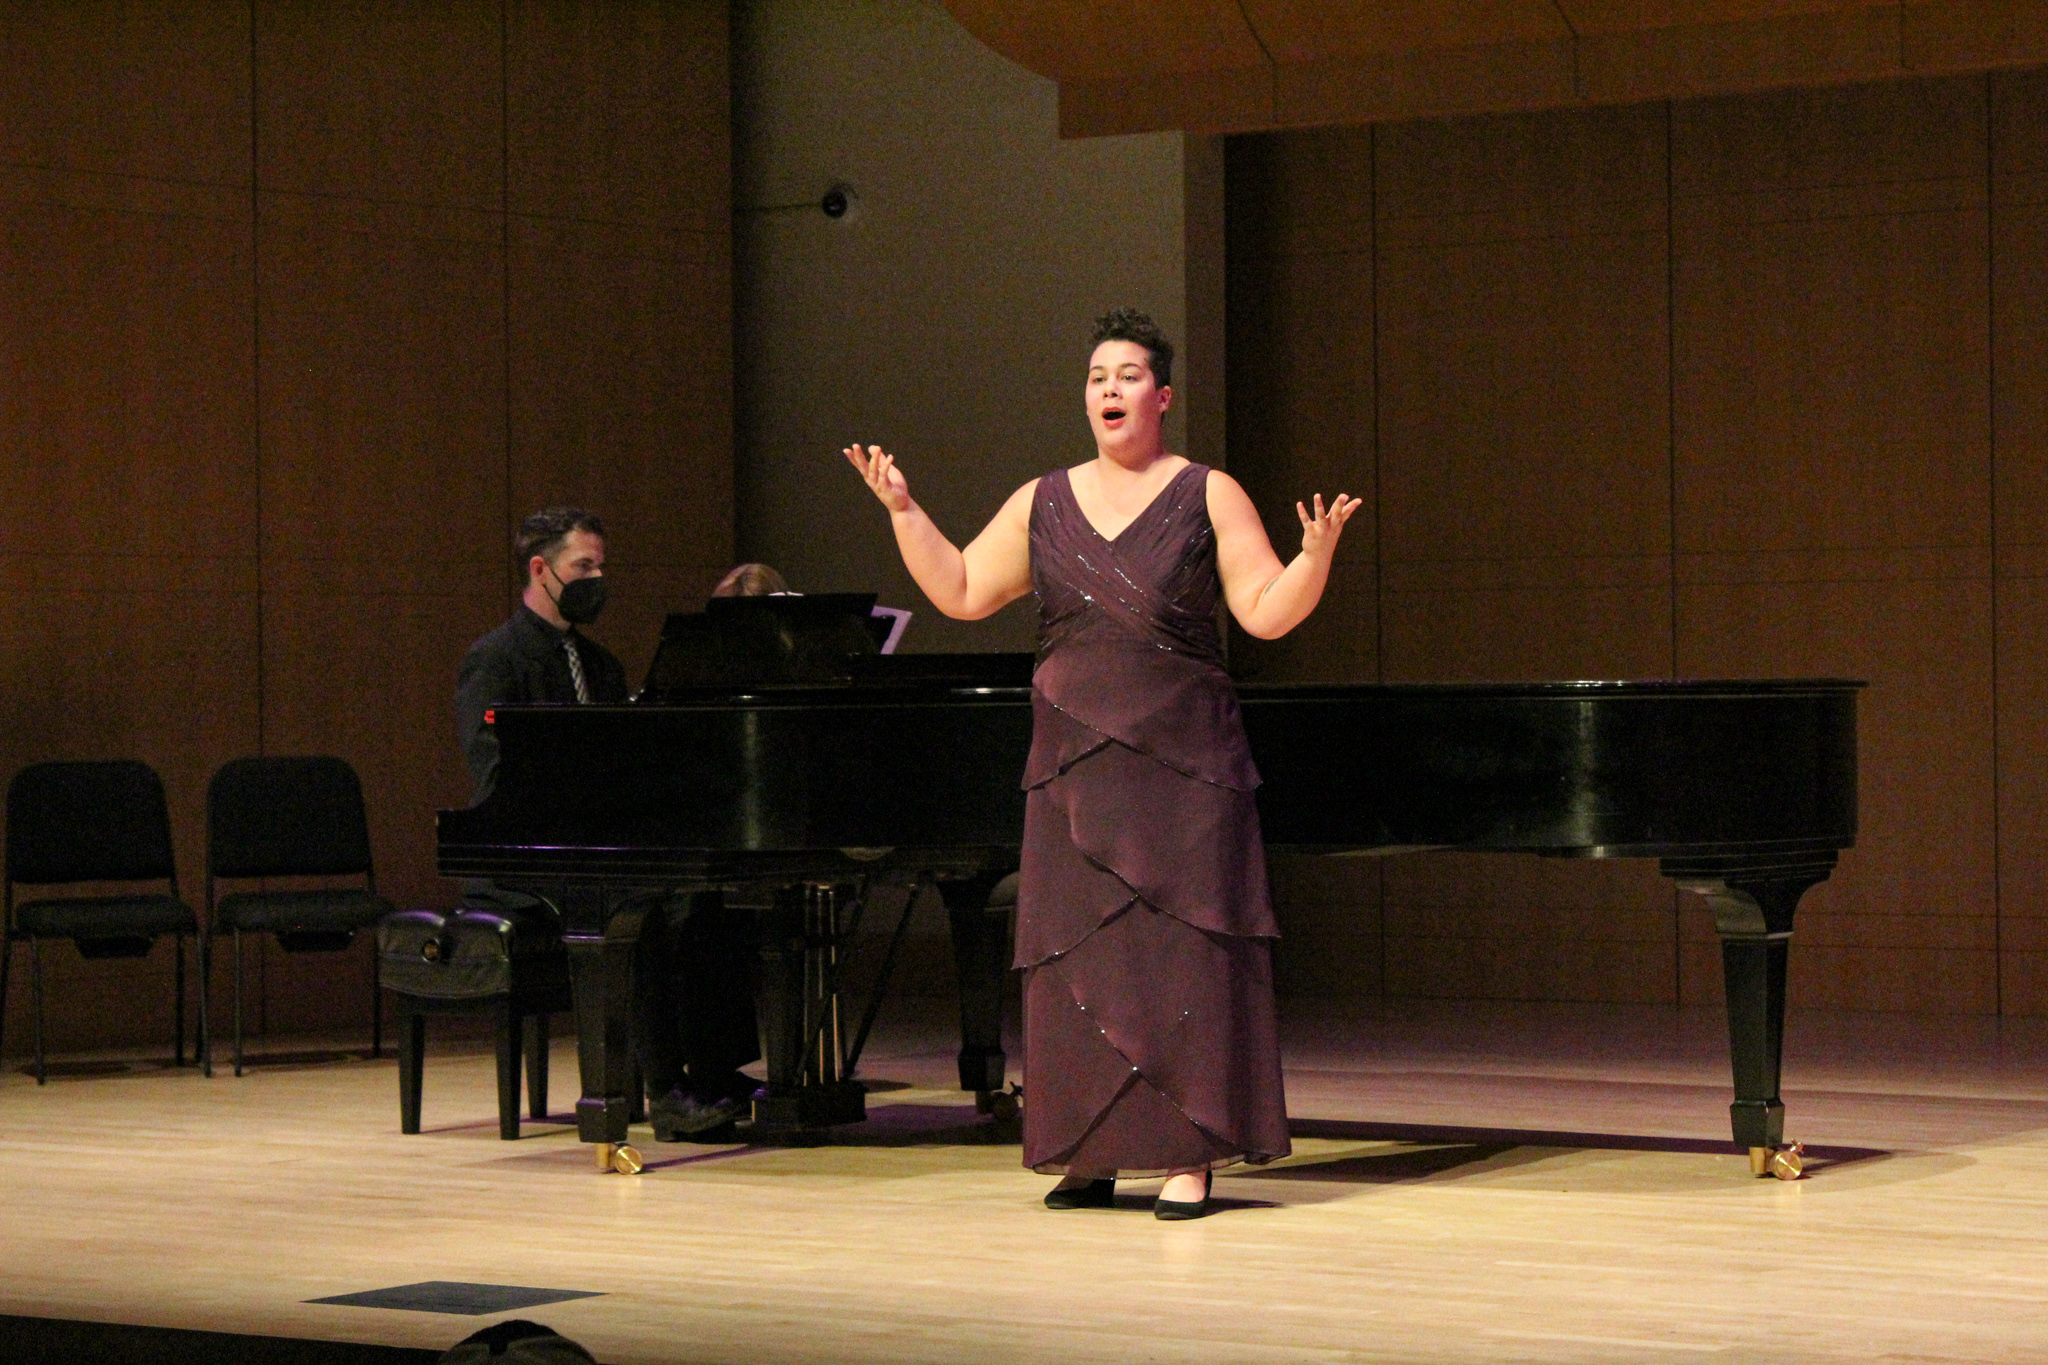 Singer on stage performing with piano accompaniment